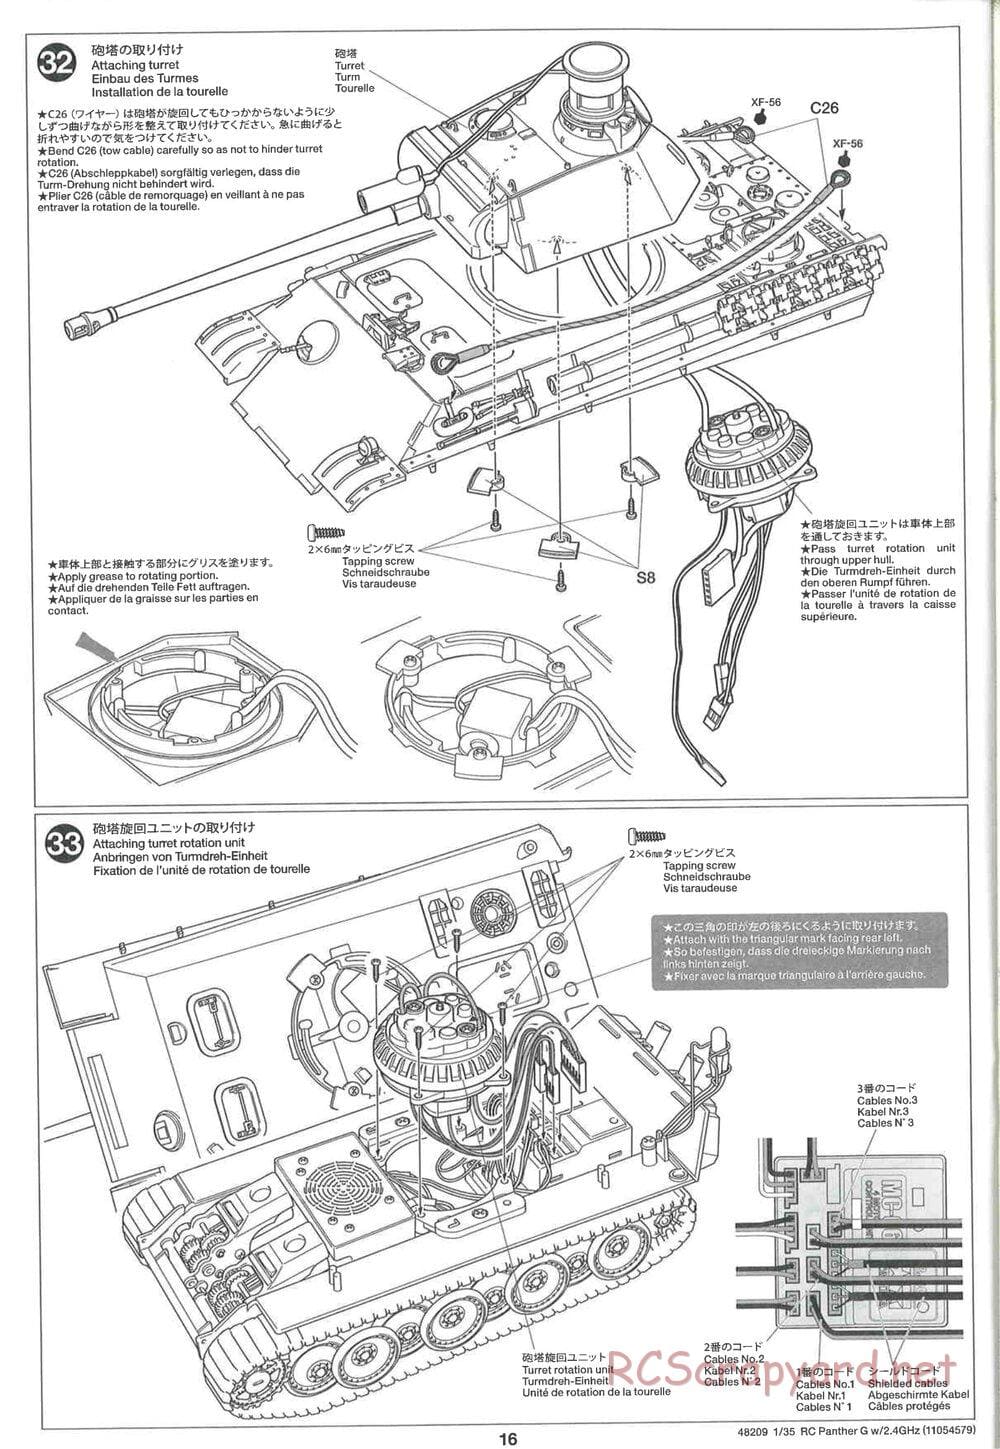 Tamiya - German Panther Type G - Late Version - 1/35 Scale Chassis - Manual - Page 16